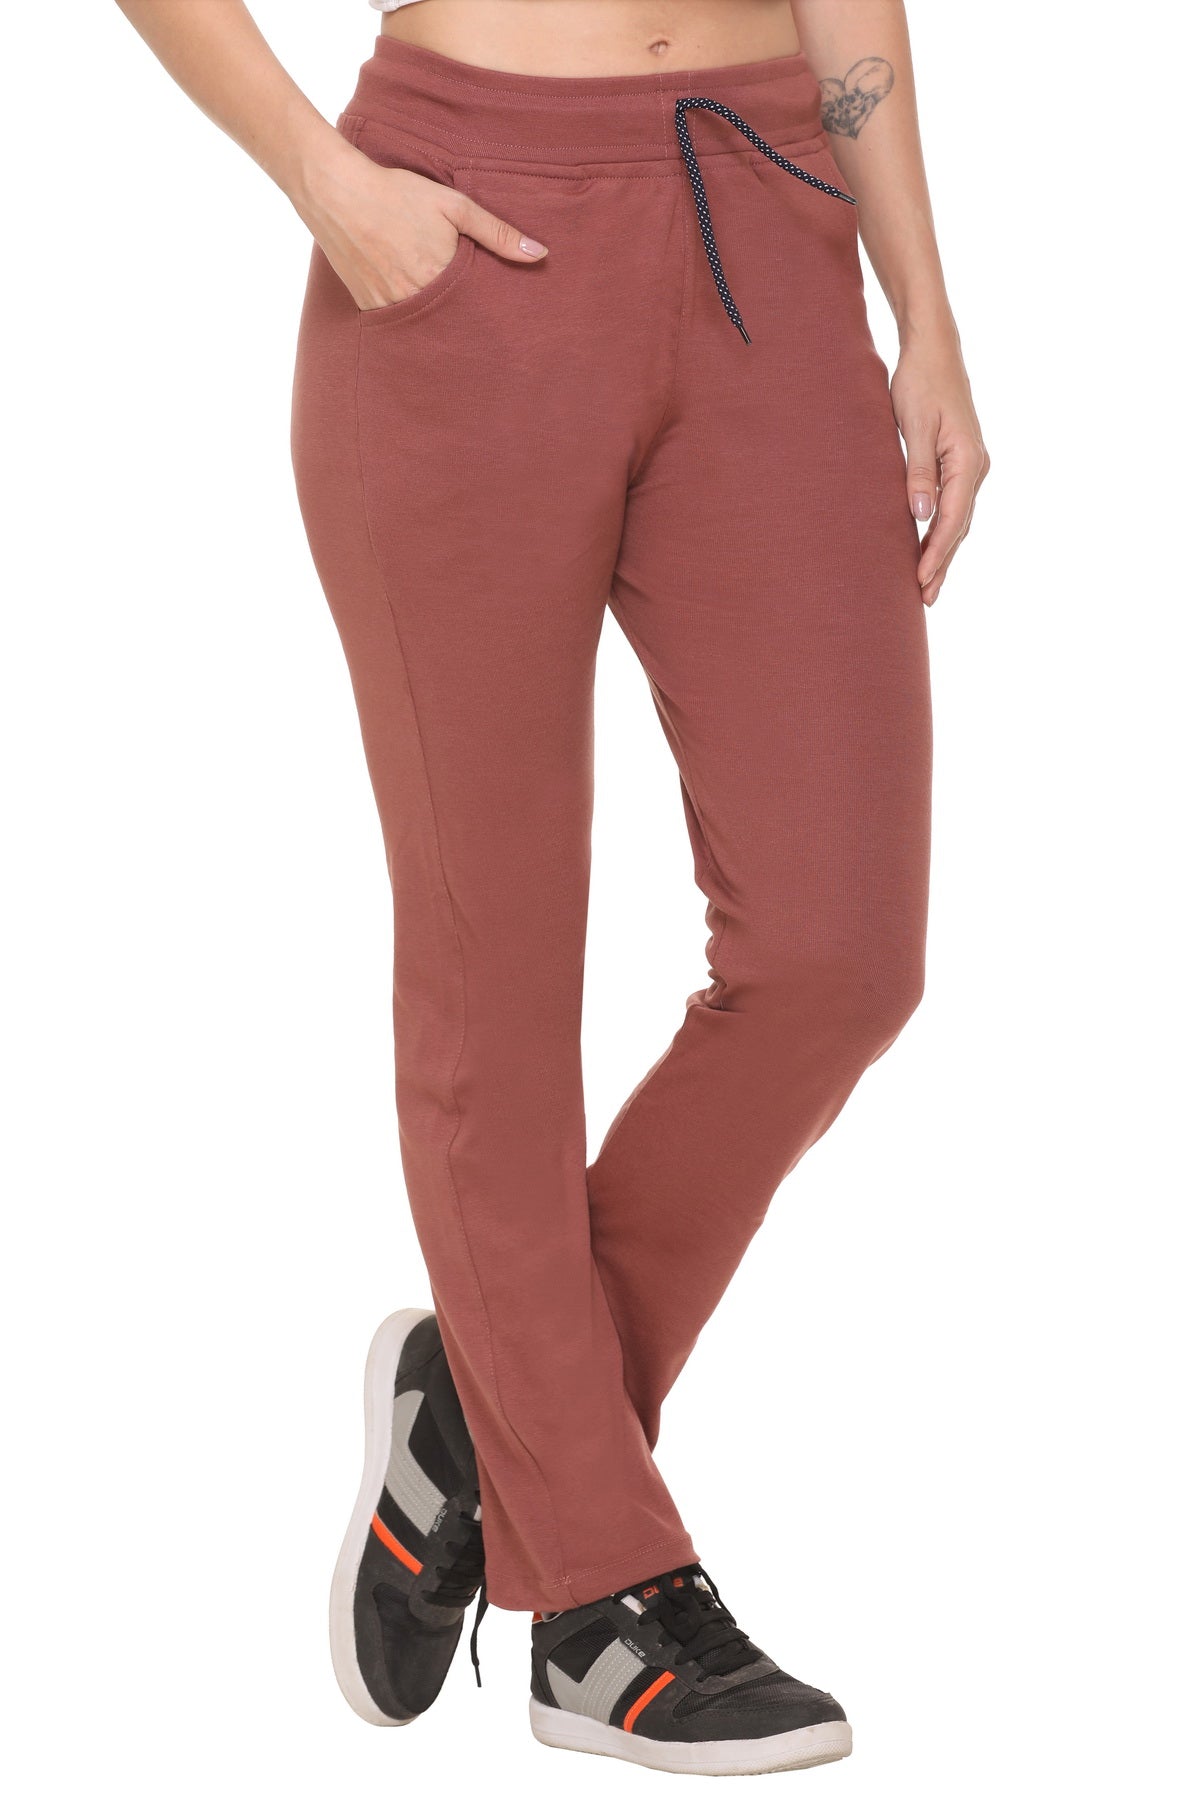 CUPID  Stretchable Cotton Lycra Track pants For Women And Girls freeshipping - Cupid Clothings